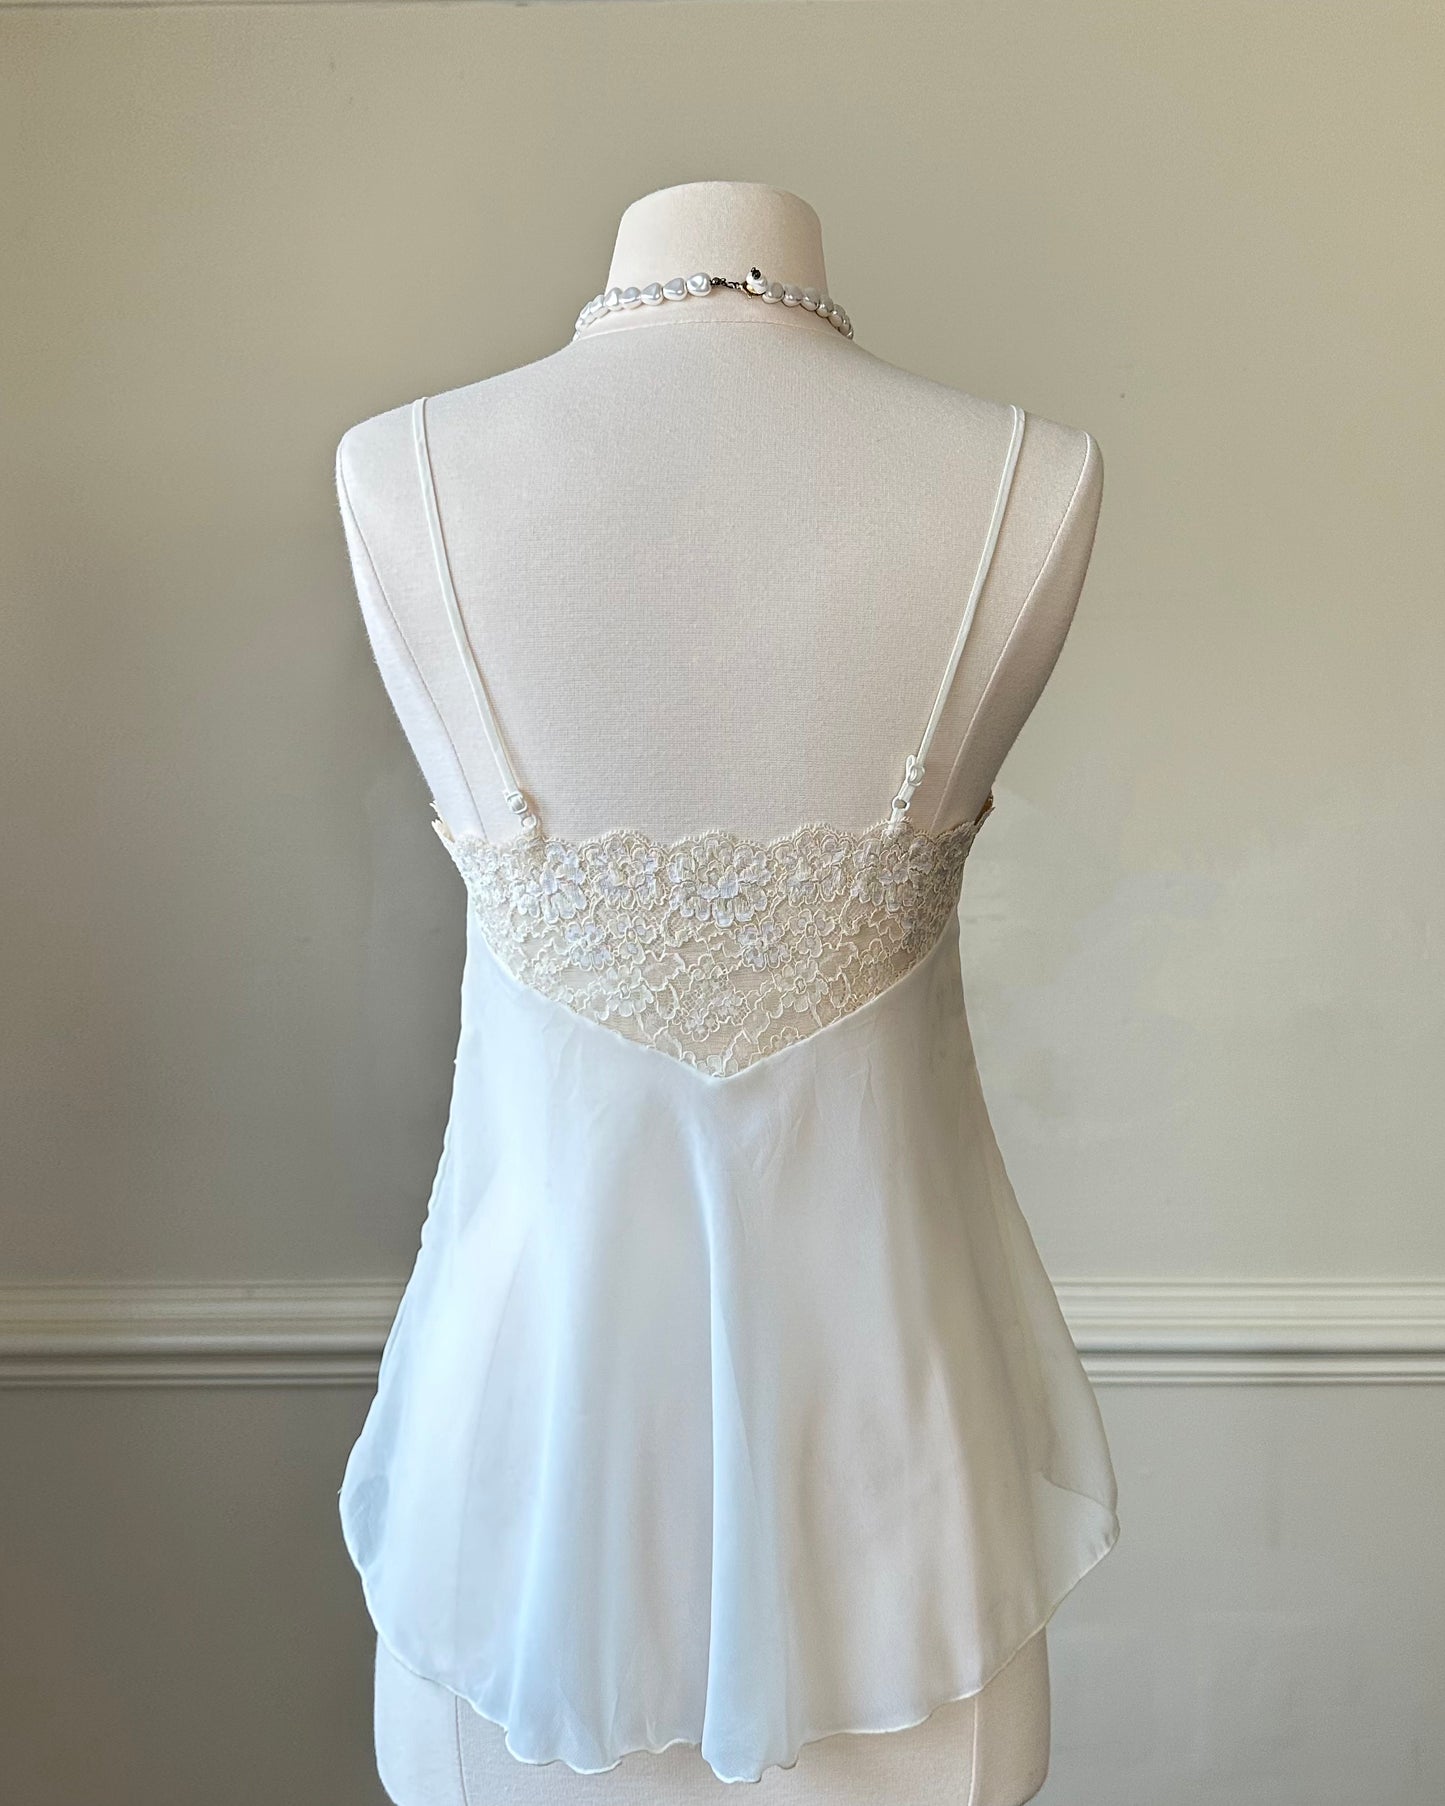 Fairy Sheer Vintage White Camisole featuring Delicate Floral Lace Bustier